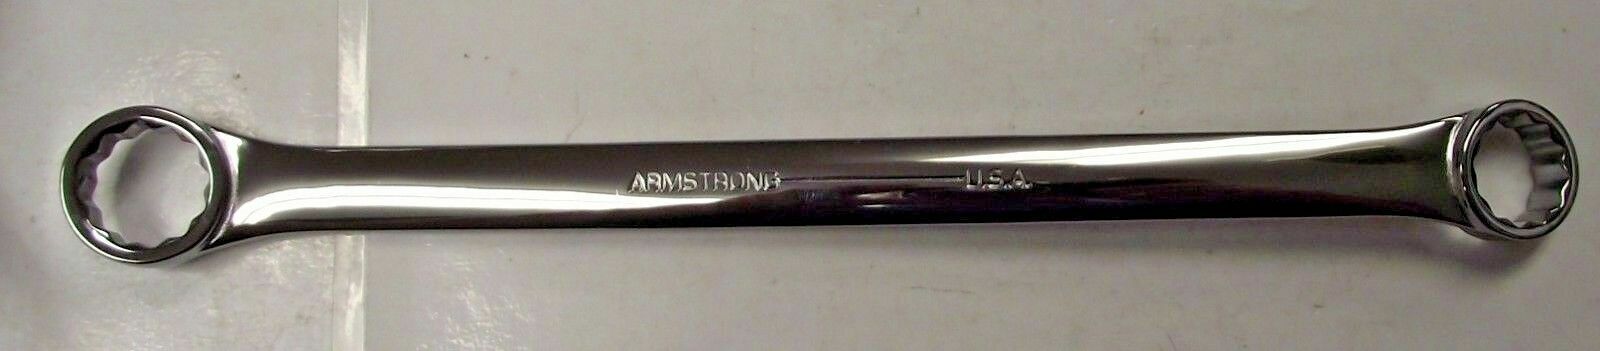 Armstrong Tools 53-715 12pt. Box End Wrench 20mm X 22mm Usa